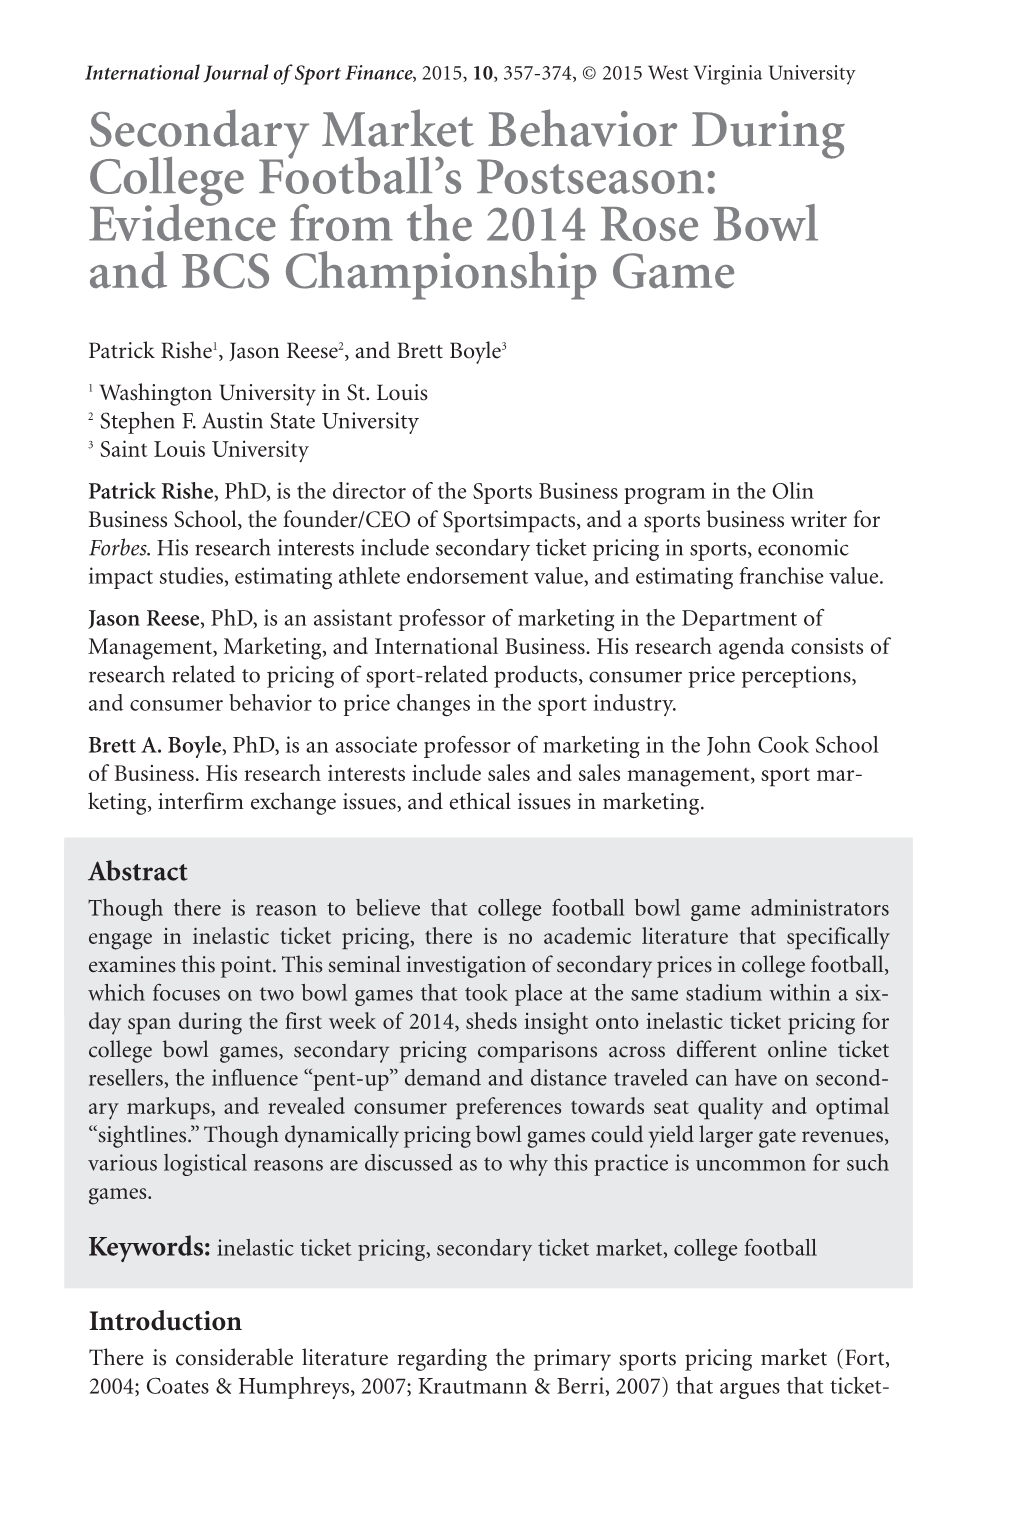 Secondary Market Behavior During College Football’S Postseason: Evidence from the 2014 Rose Bowl and BCS Championship Game